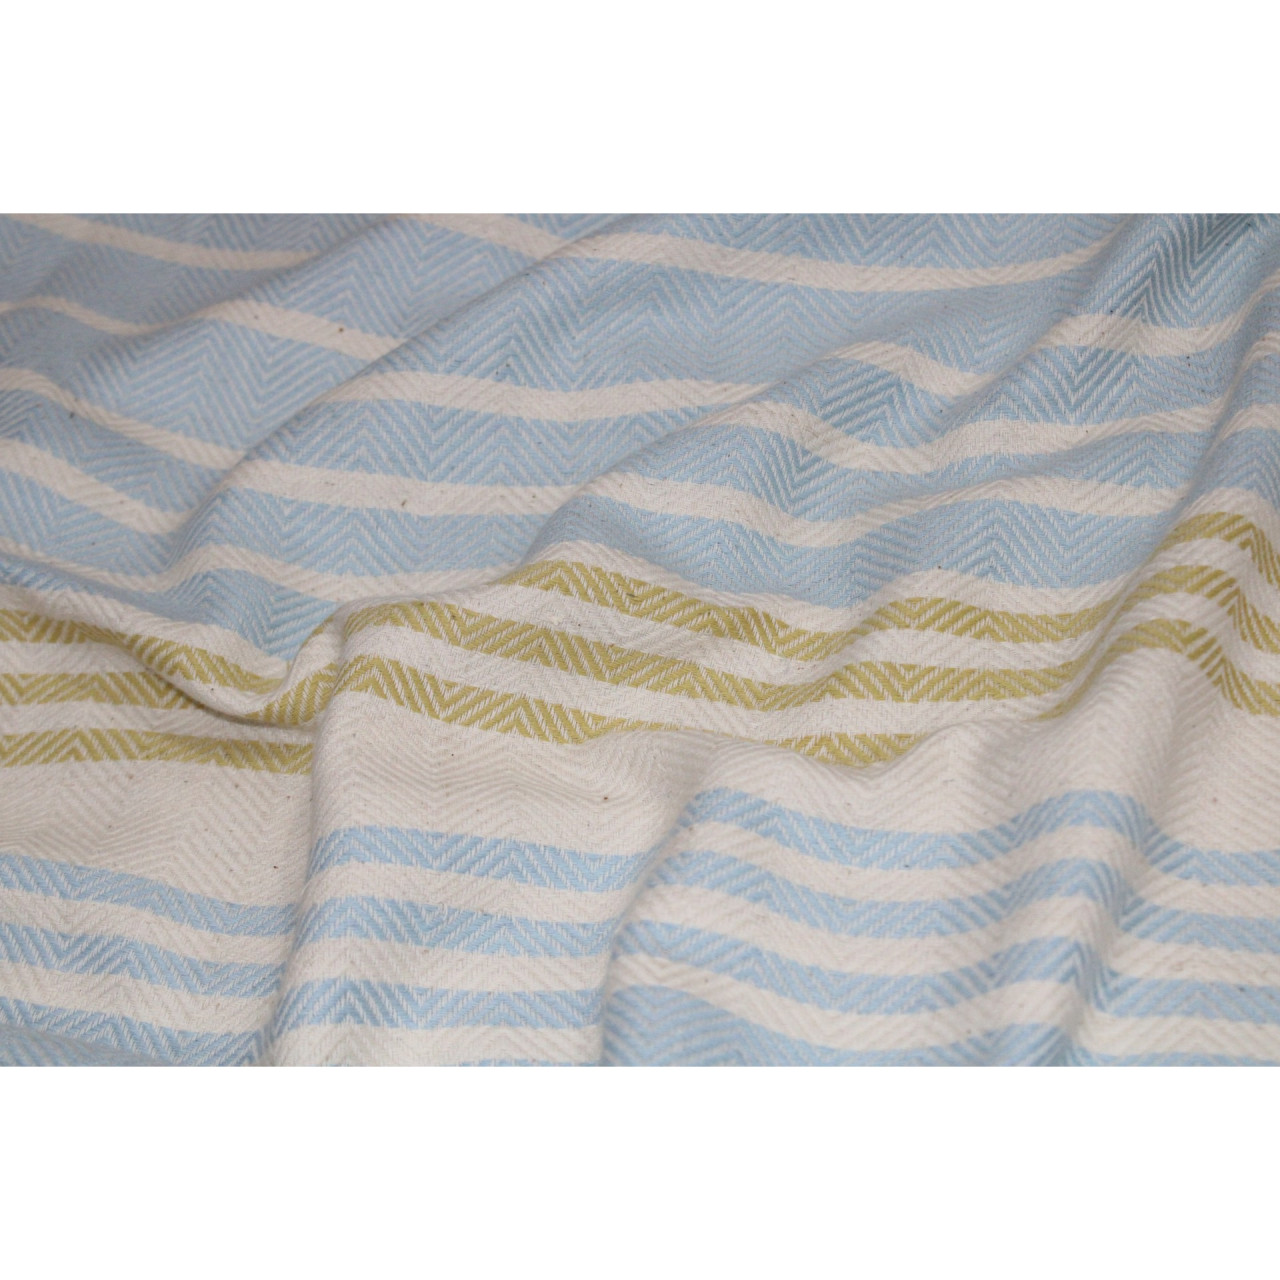 (1438) Cotton and khadi  Azo-free dyed throw from Bihar - White, sky blue, mustard, stripes, textured, piped fringes